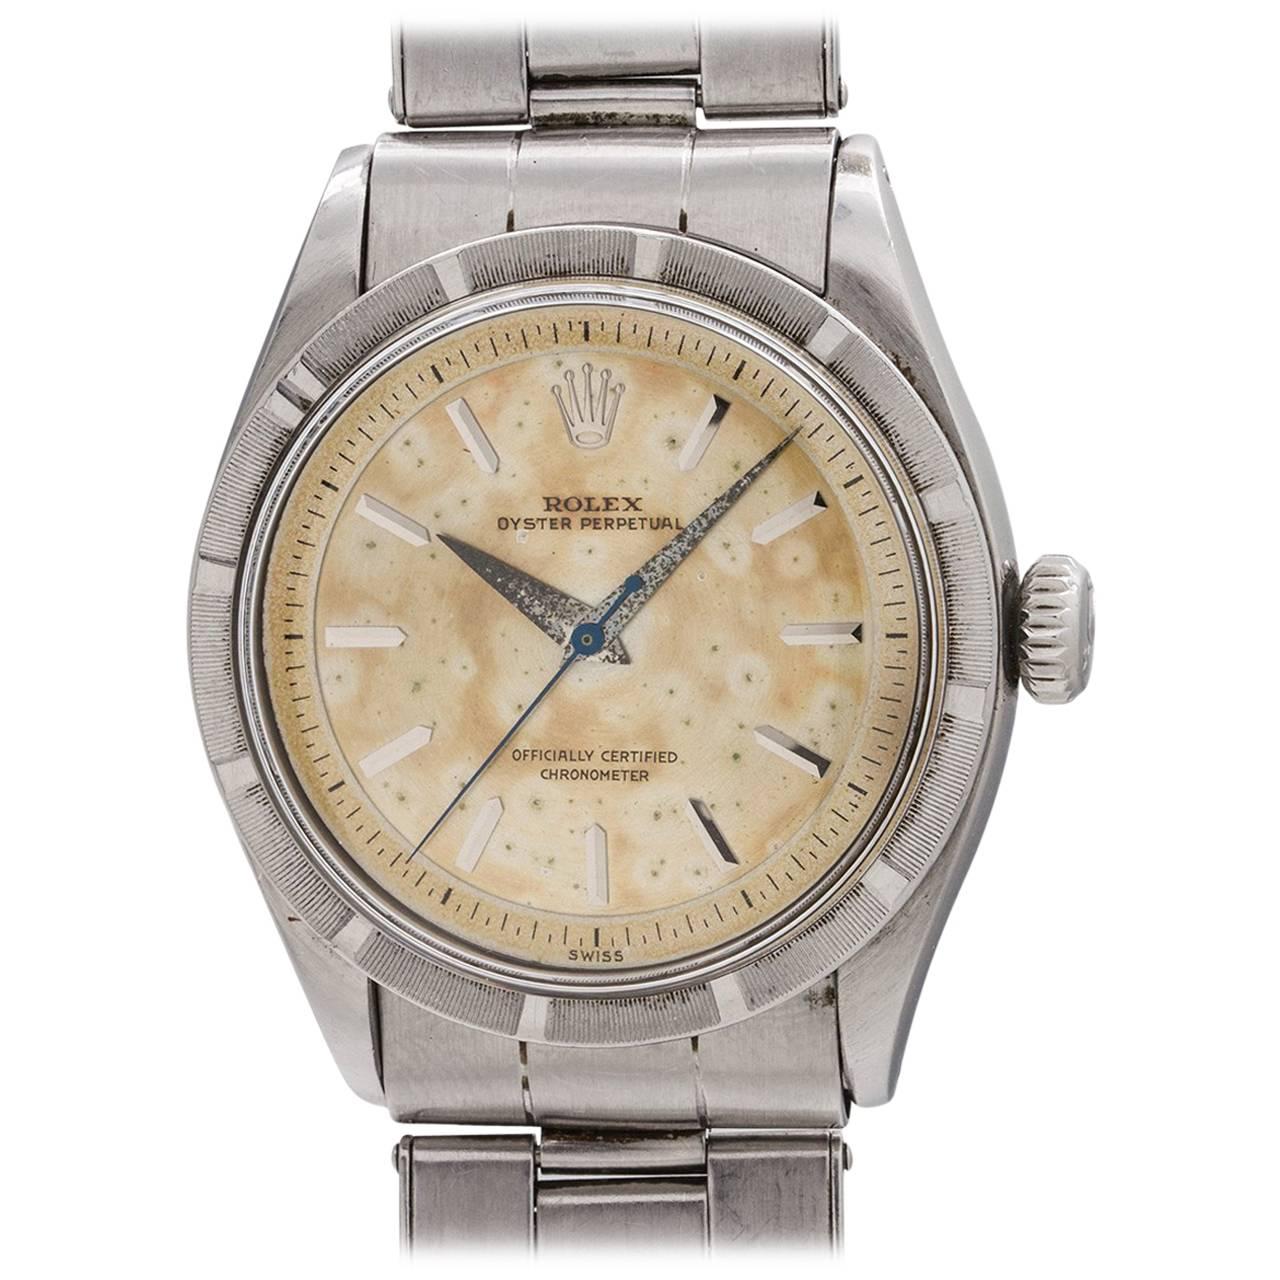 Rolex Stainless Steel Oyster Perpetual self winding Wristwatch, circa 1954